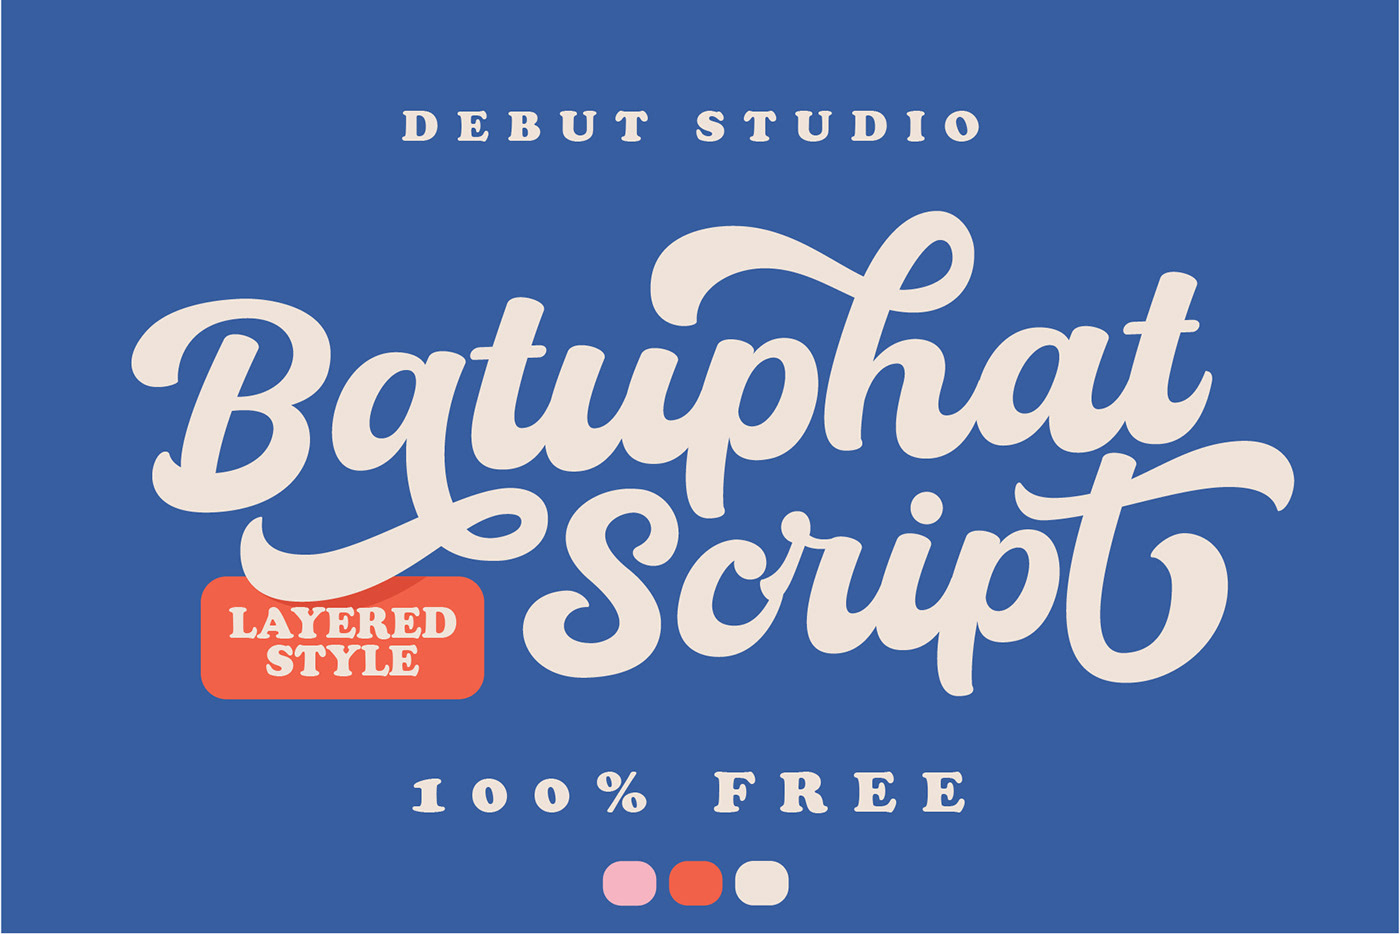 Bold Script craft font debut studio Font Bundle free fonts HAND LETTERING layered fonts Logotype strong typography  